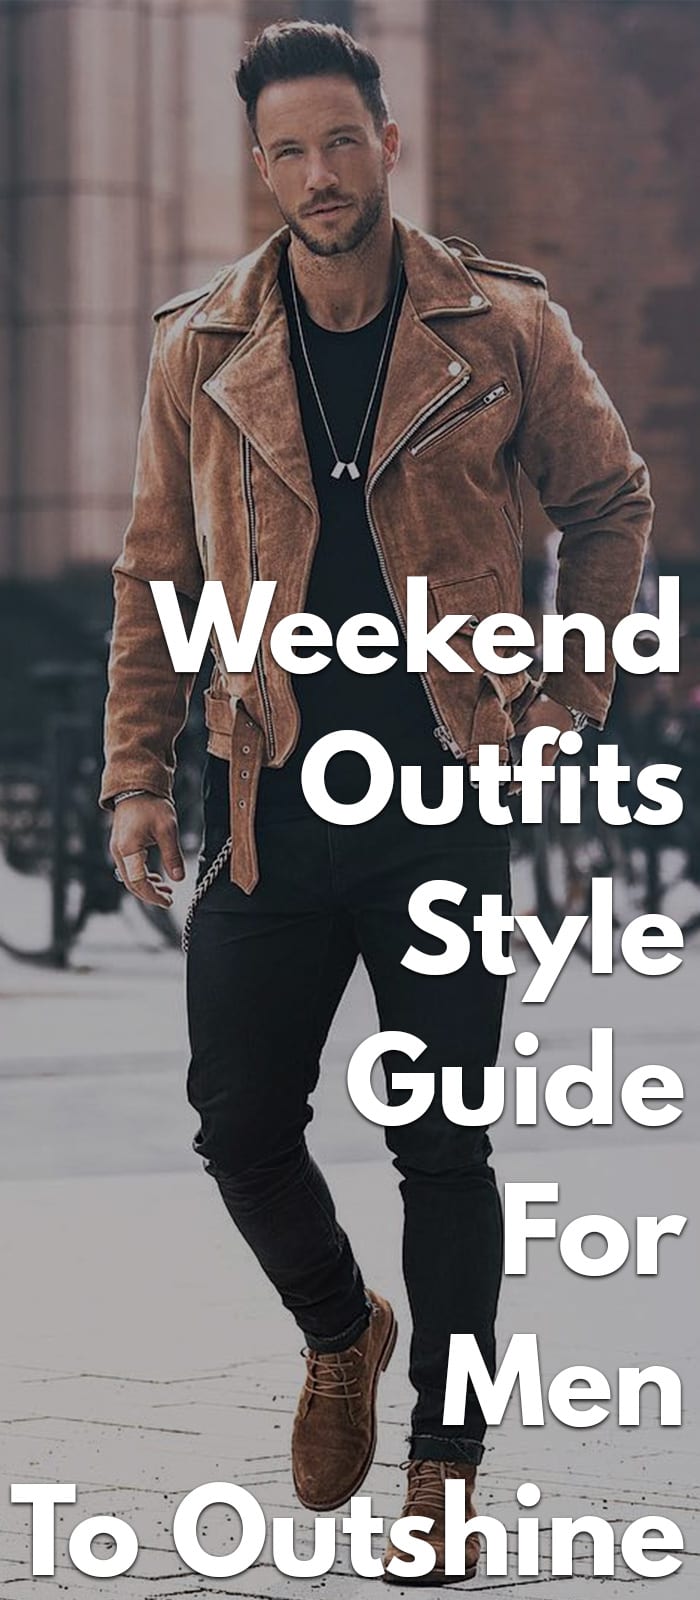 Weekend-Outfits-Style-Guide-For-Men-To-Outshine.